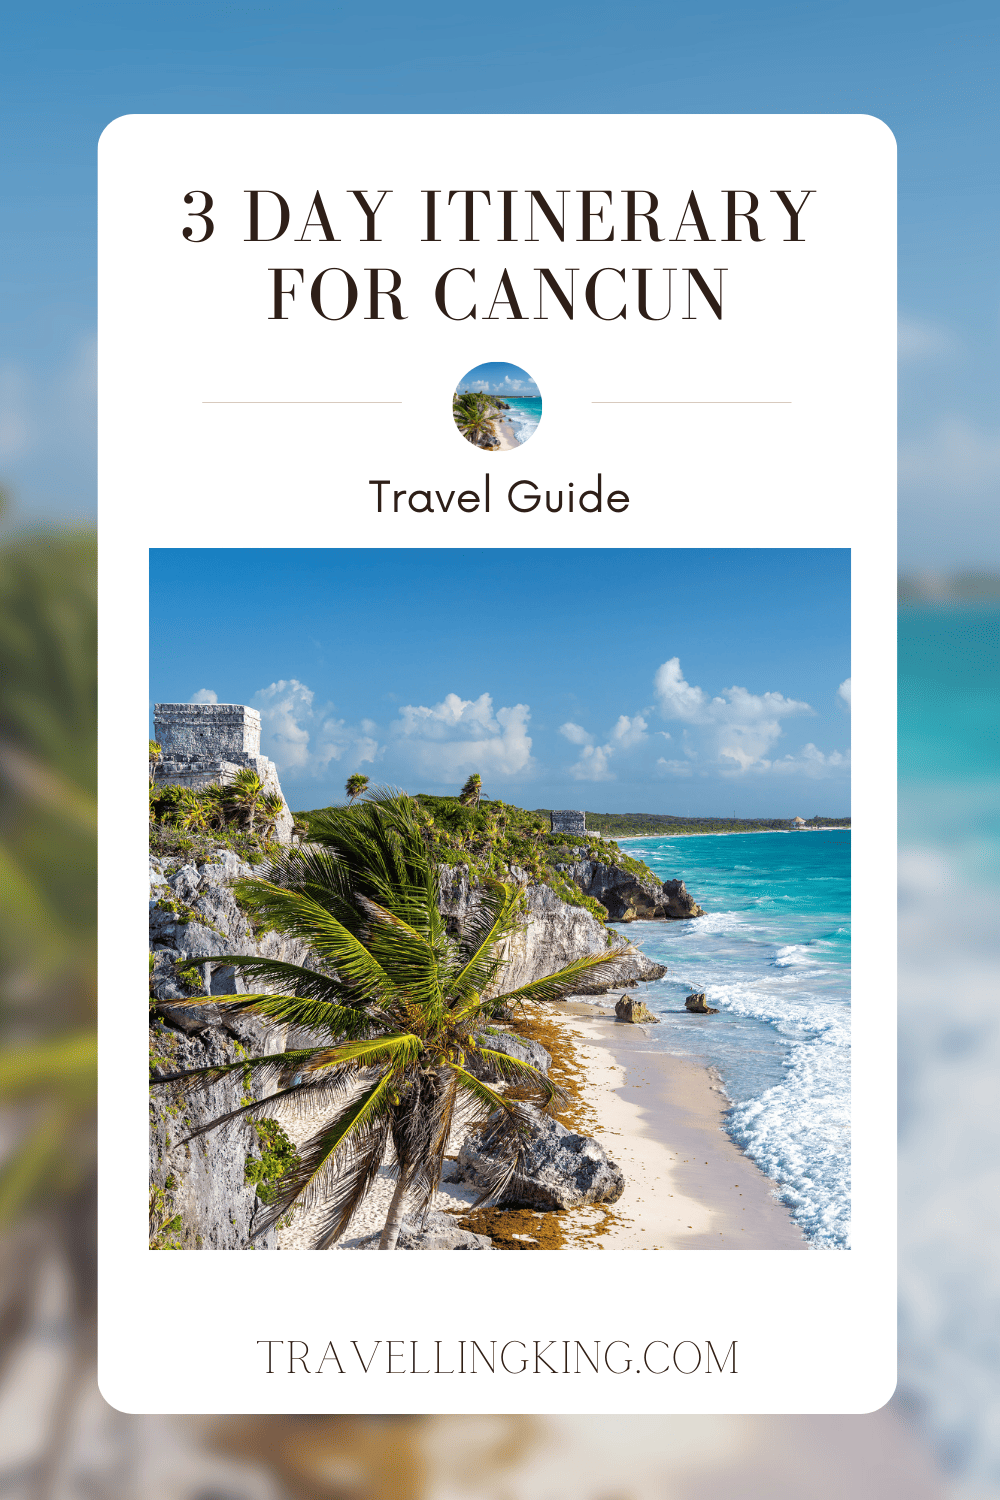 3 Day Itinerary for Cancun